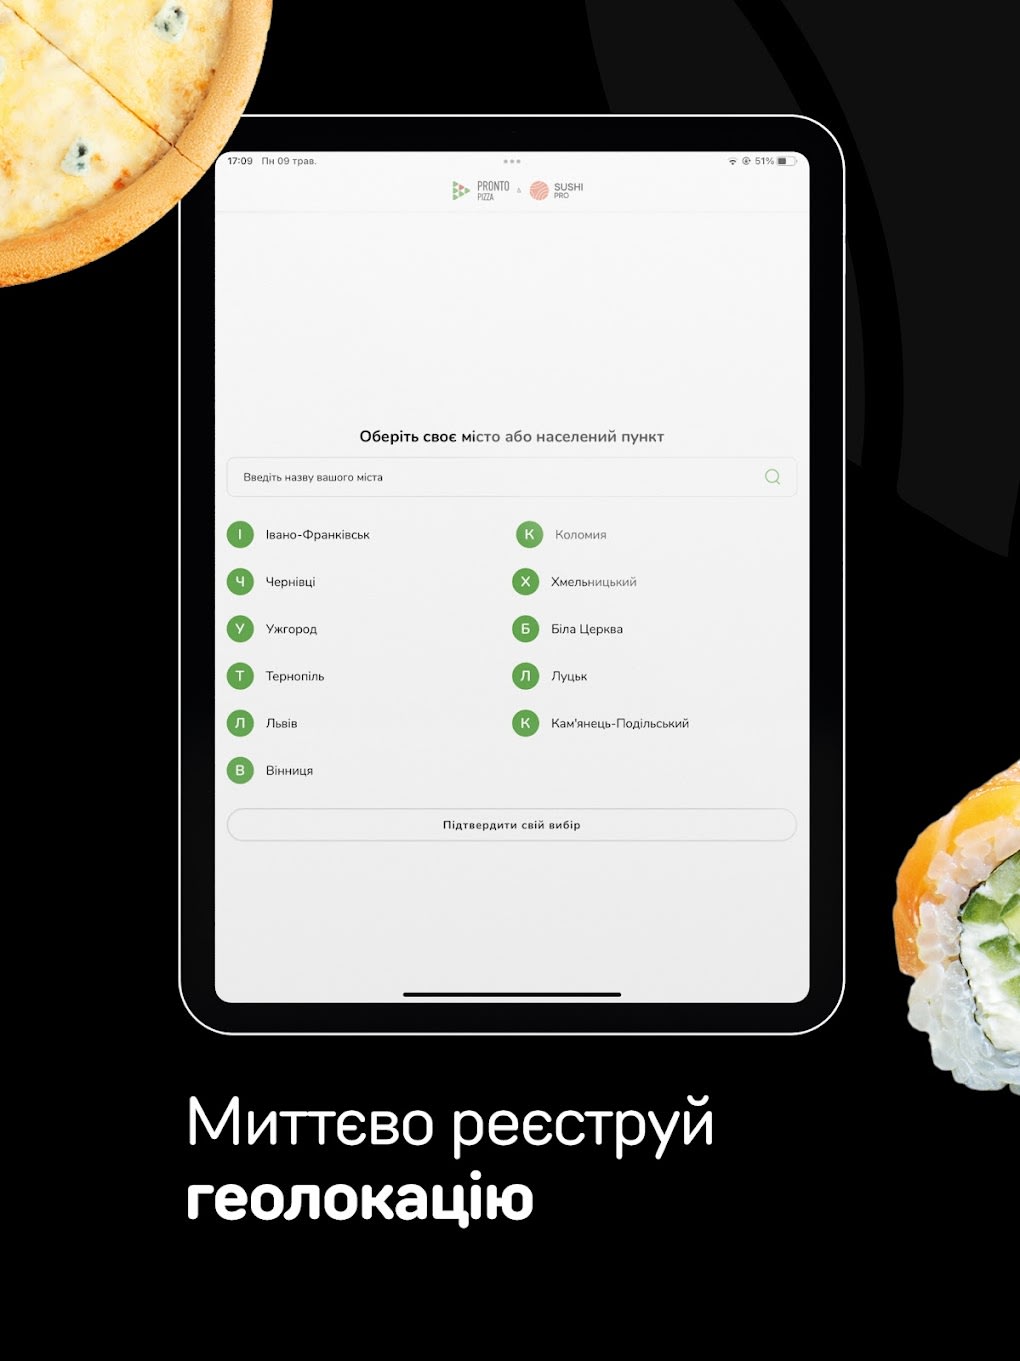 ProntoPizza - food delivery for Android - Free App Download